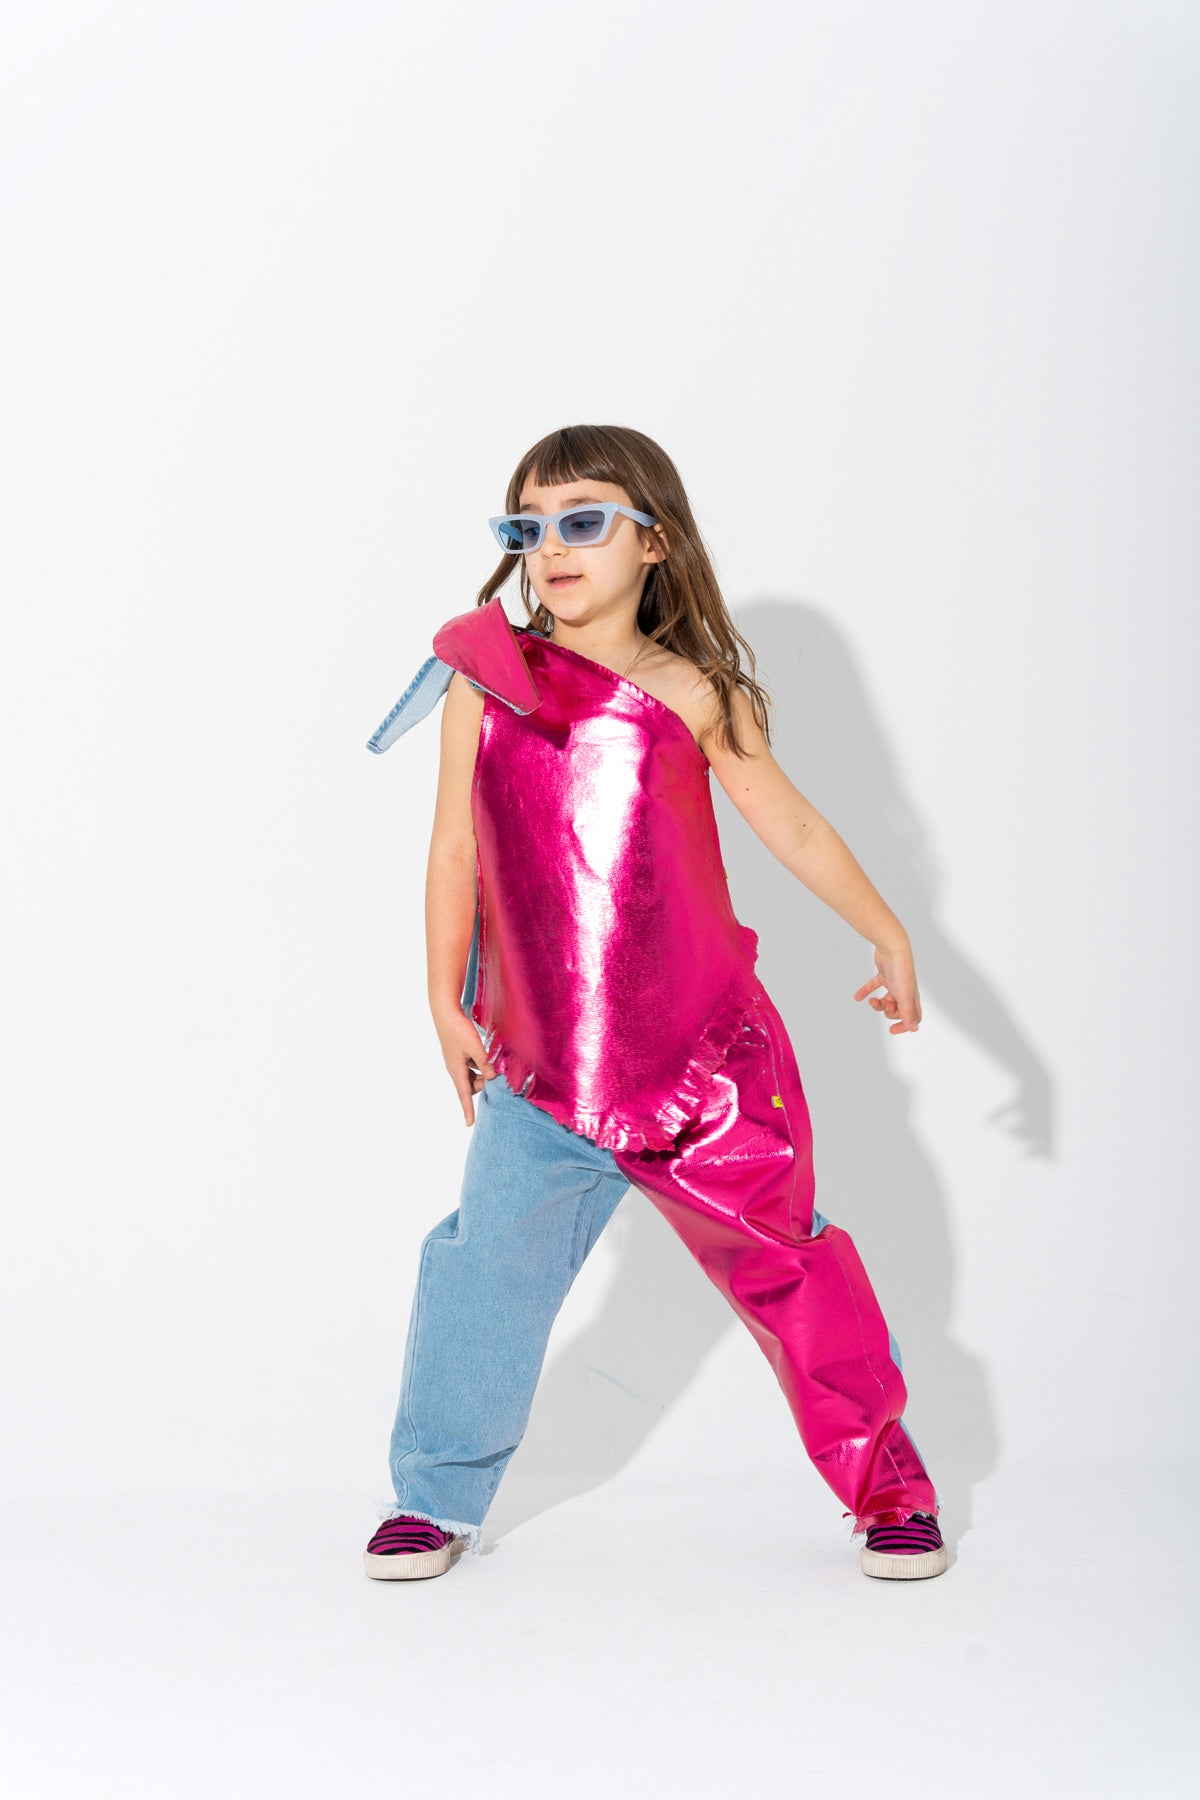 PINK FOIL BAGGY TROUSERS makids